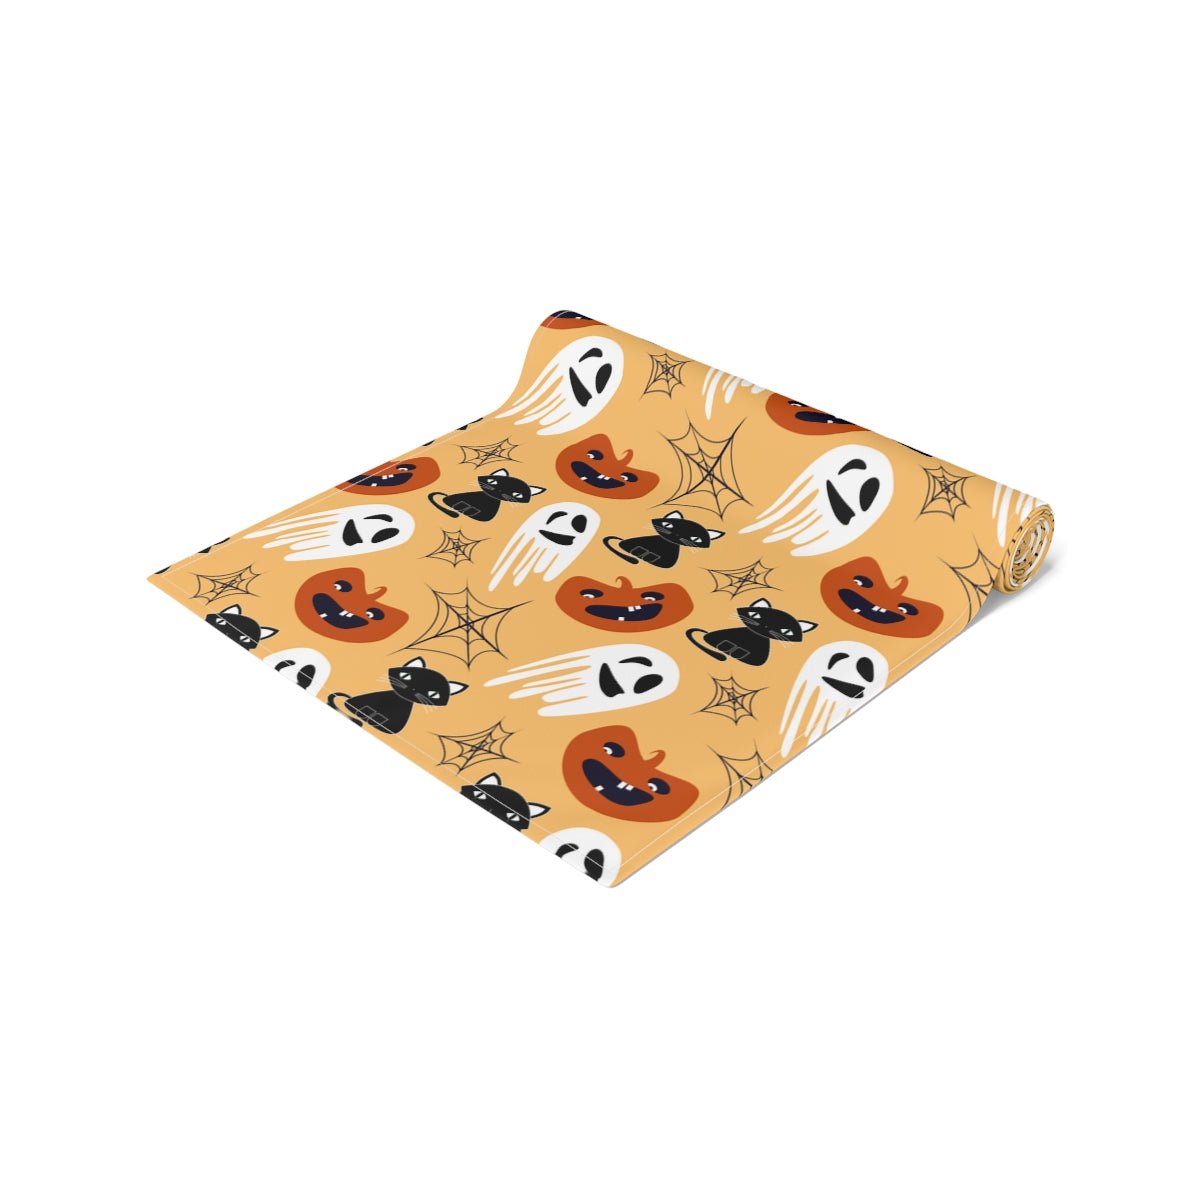 Halloween Cats and Ghosts Table Runner - Puffin Lime